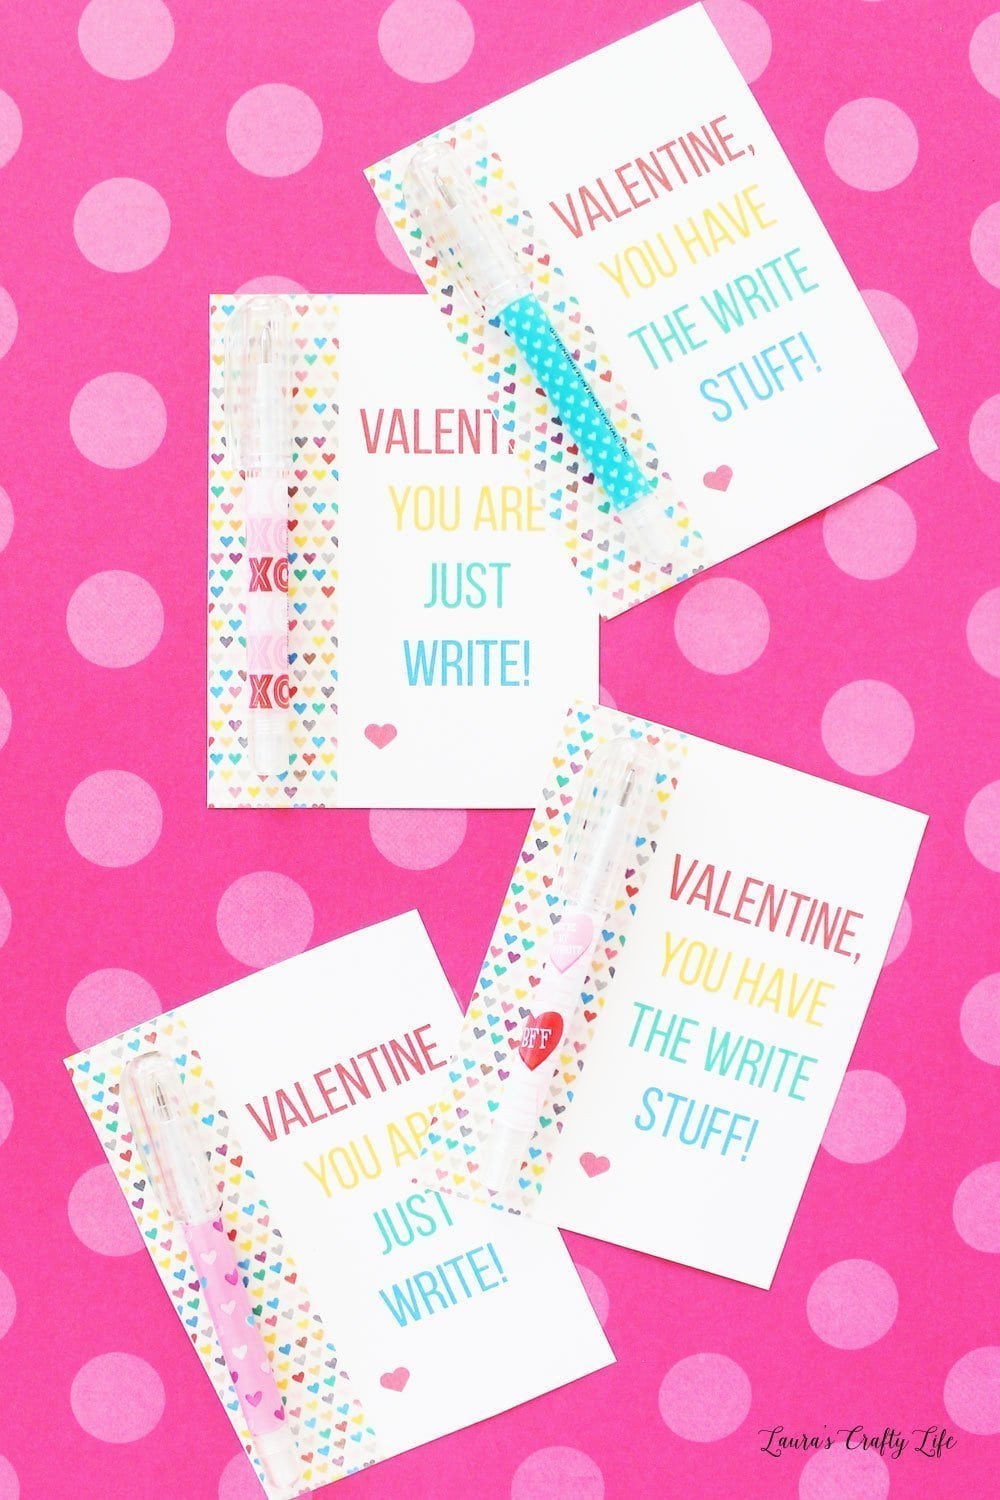 Free printable Valentine cards - attach a pen or pencil favor